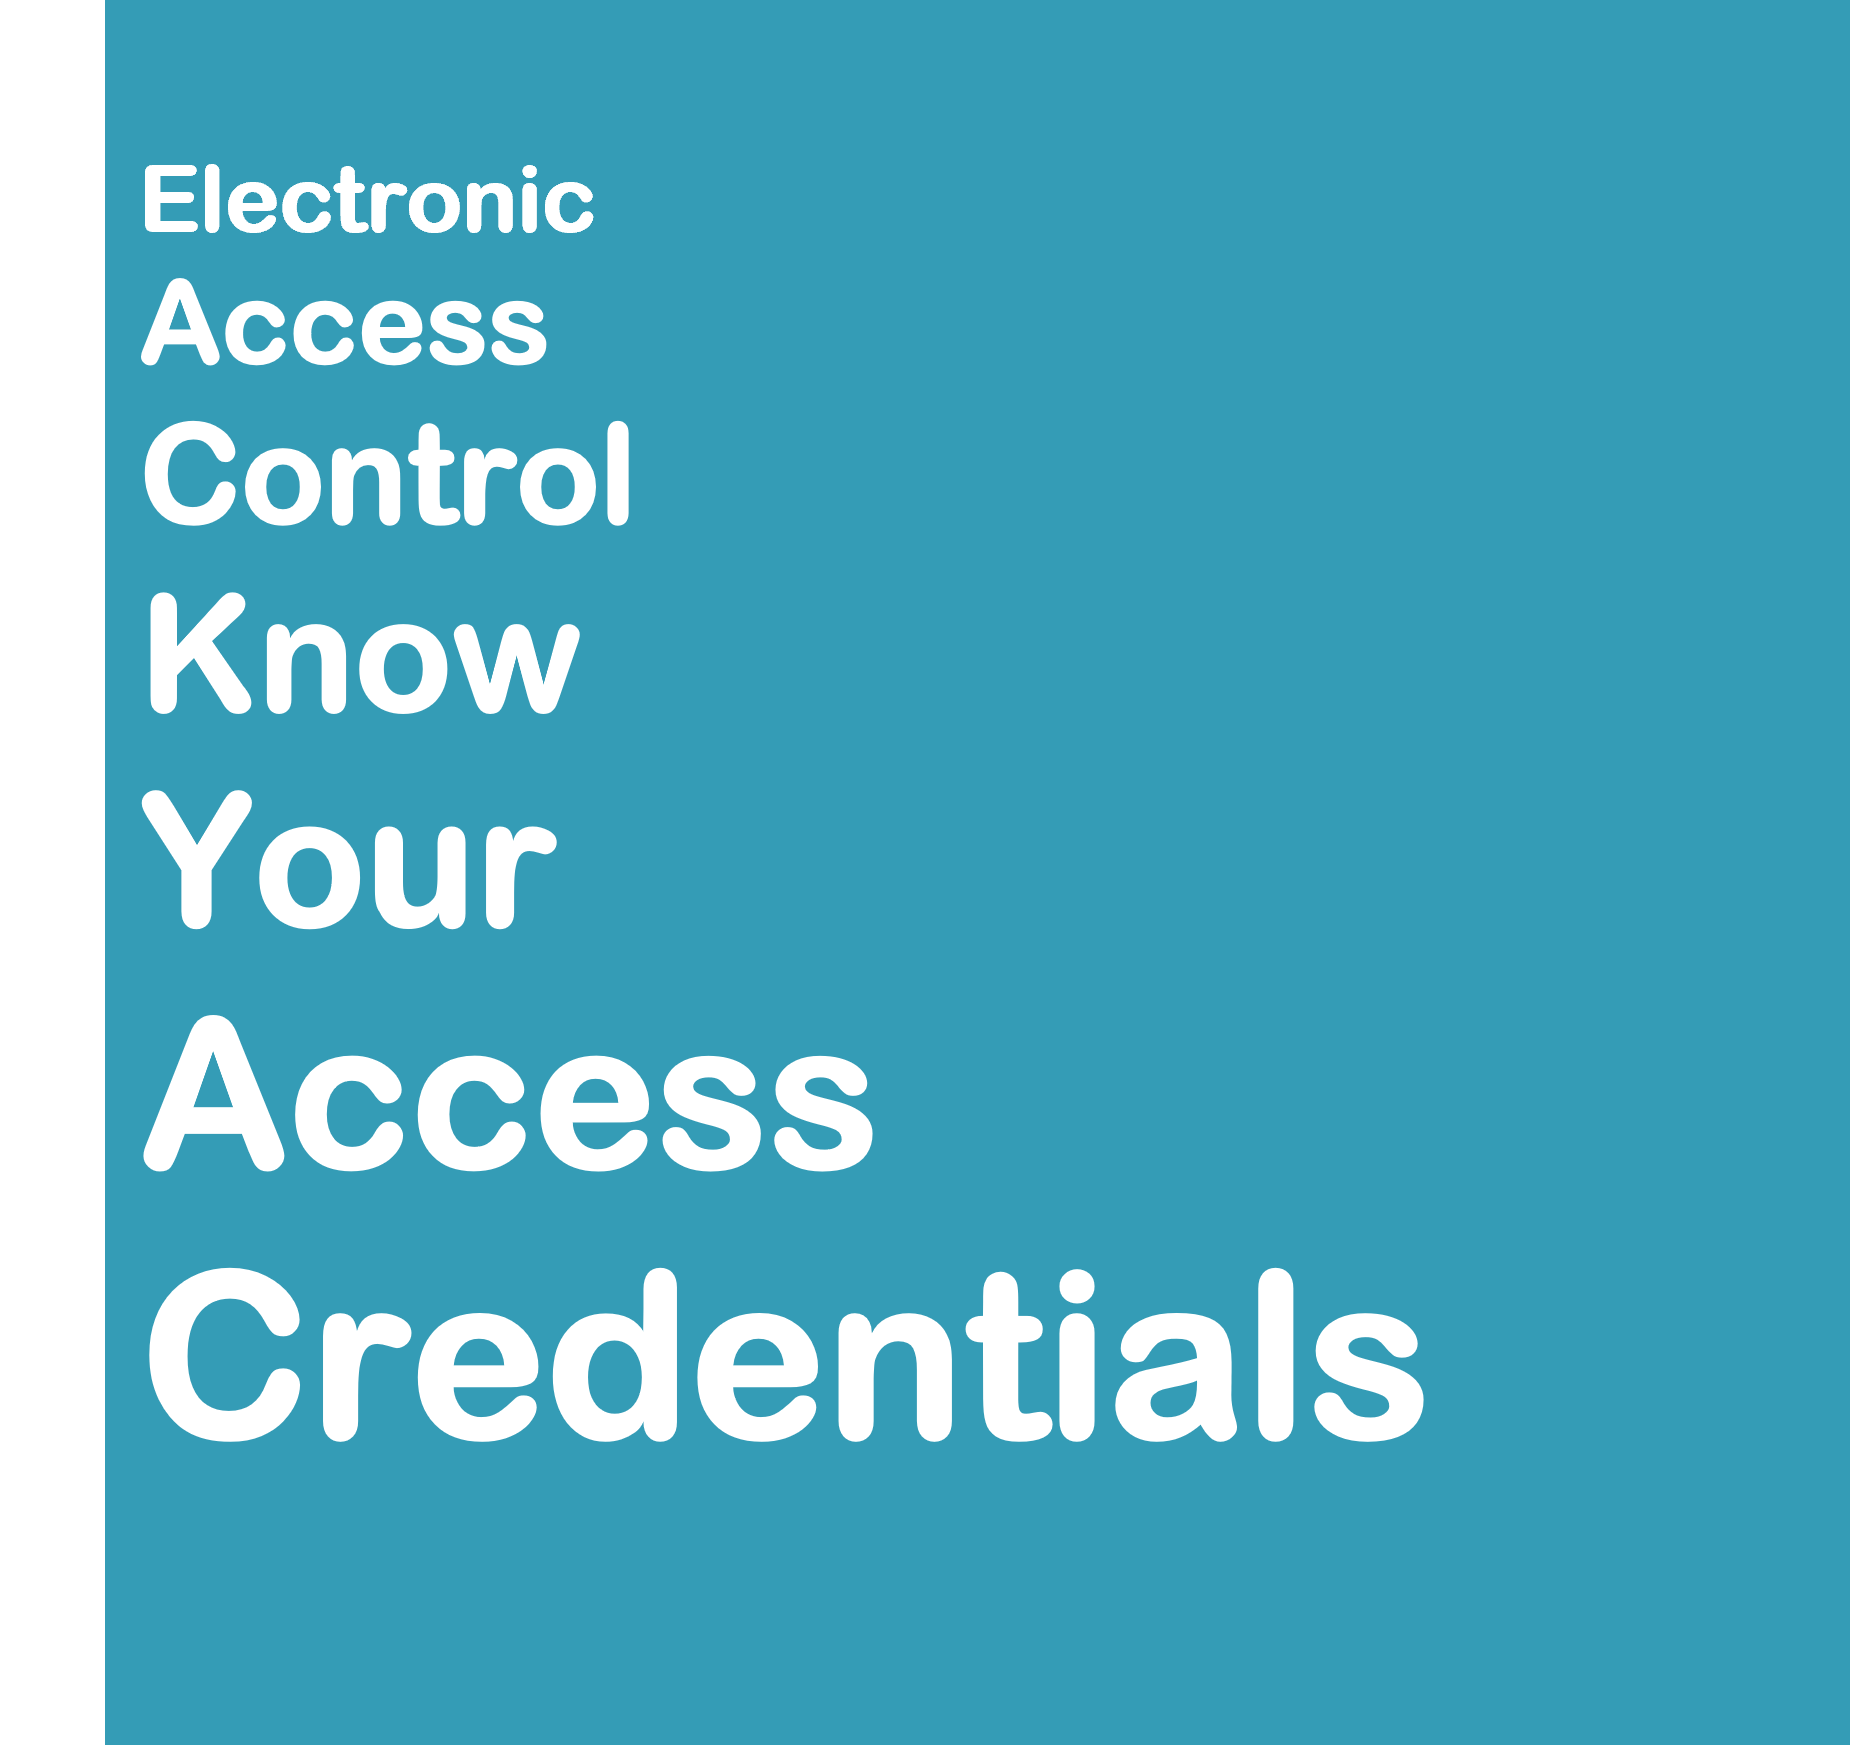 What type of access credential should I use to secure my business?